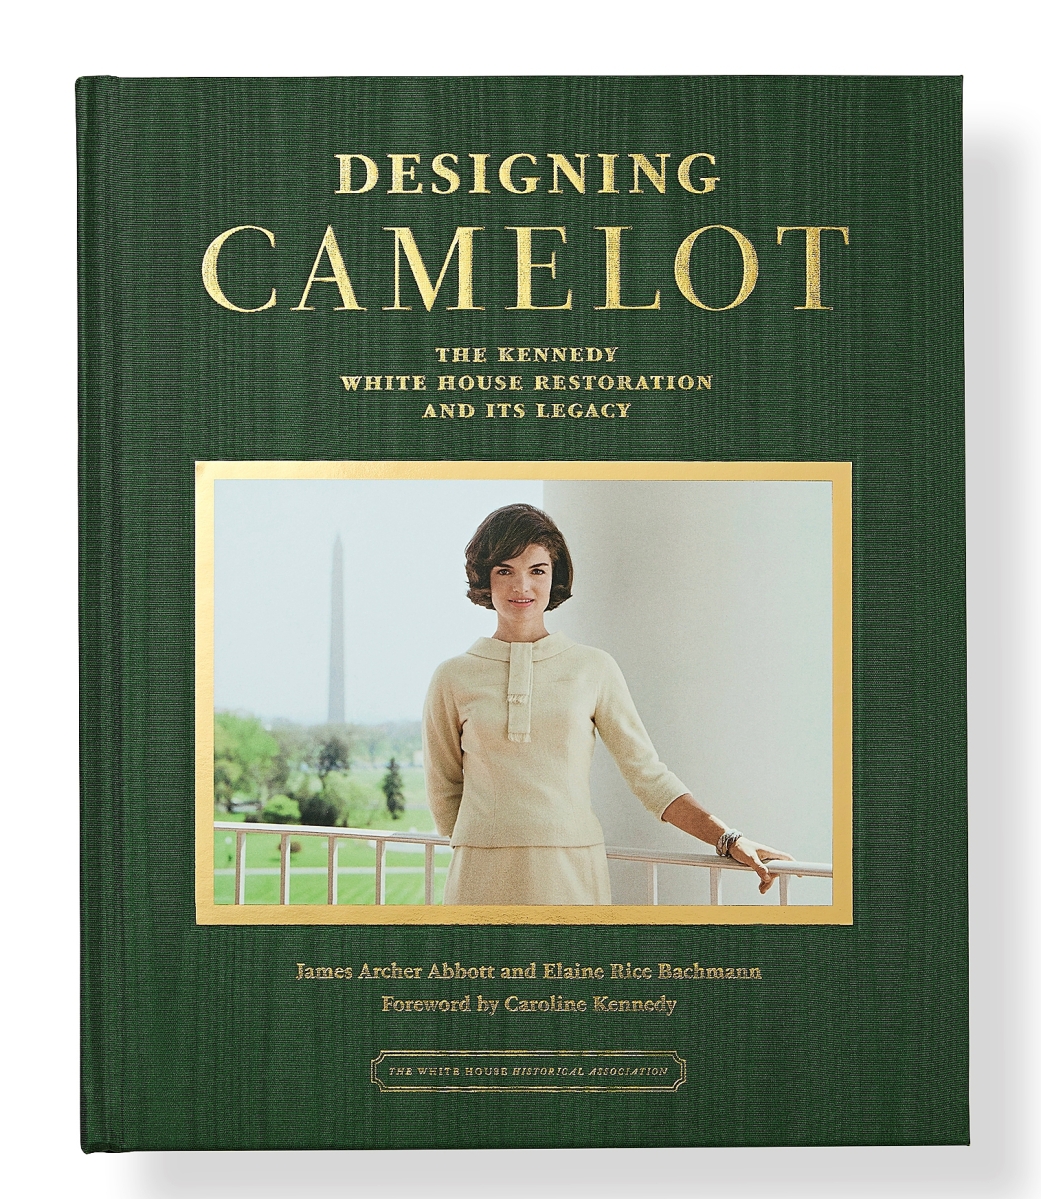 Designing Camelot: The Kennedy Restoration and its Legacy by James Archer Abbott and Elaine Bachman with a foreword by Caroline Kennedy will be released by the White House Historical Association on July 28, 2021. Photo credit: White House Historical Association.